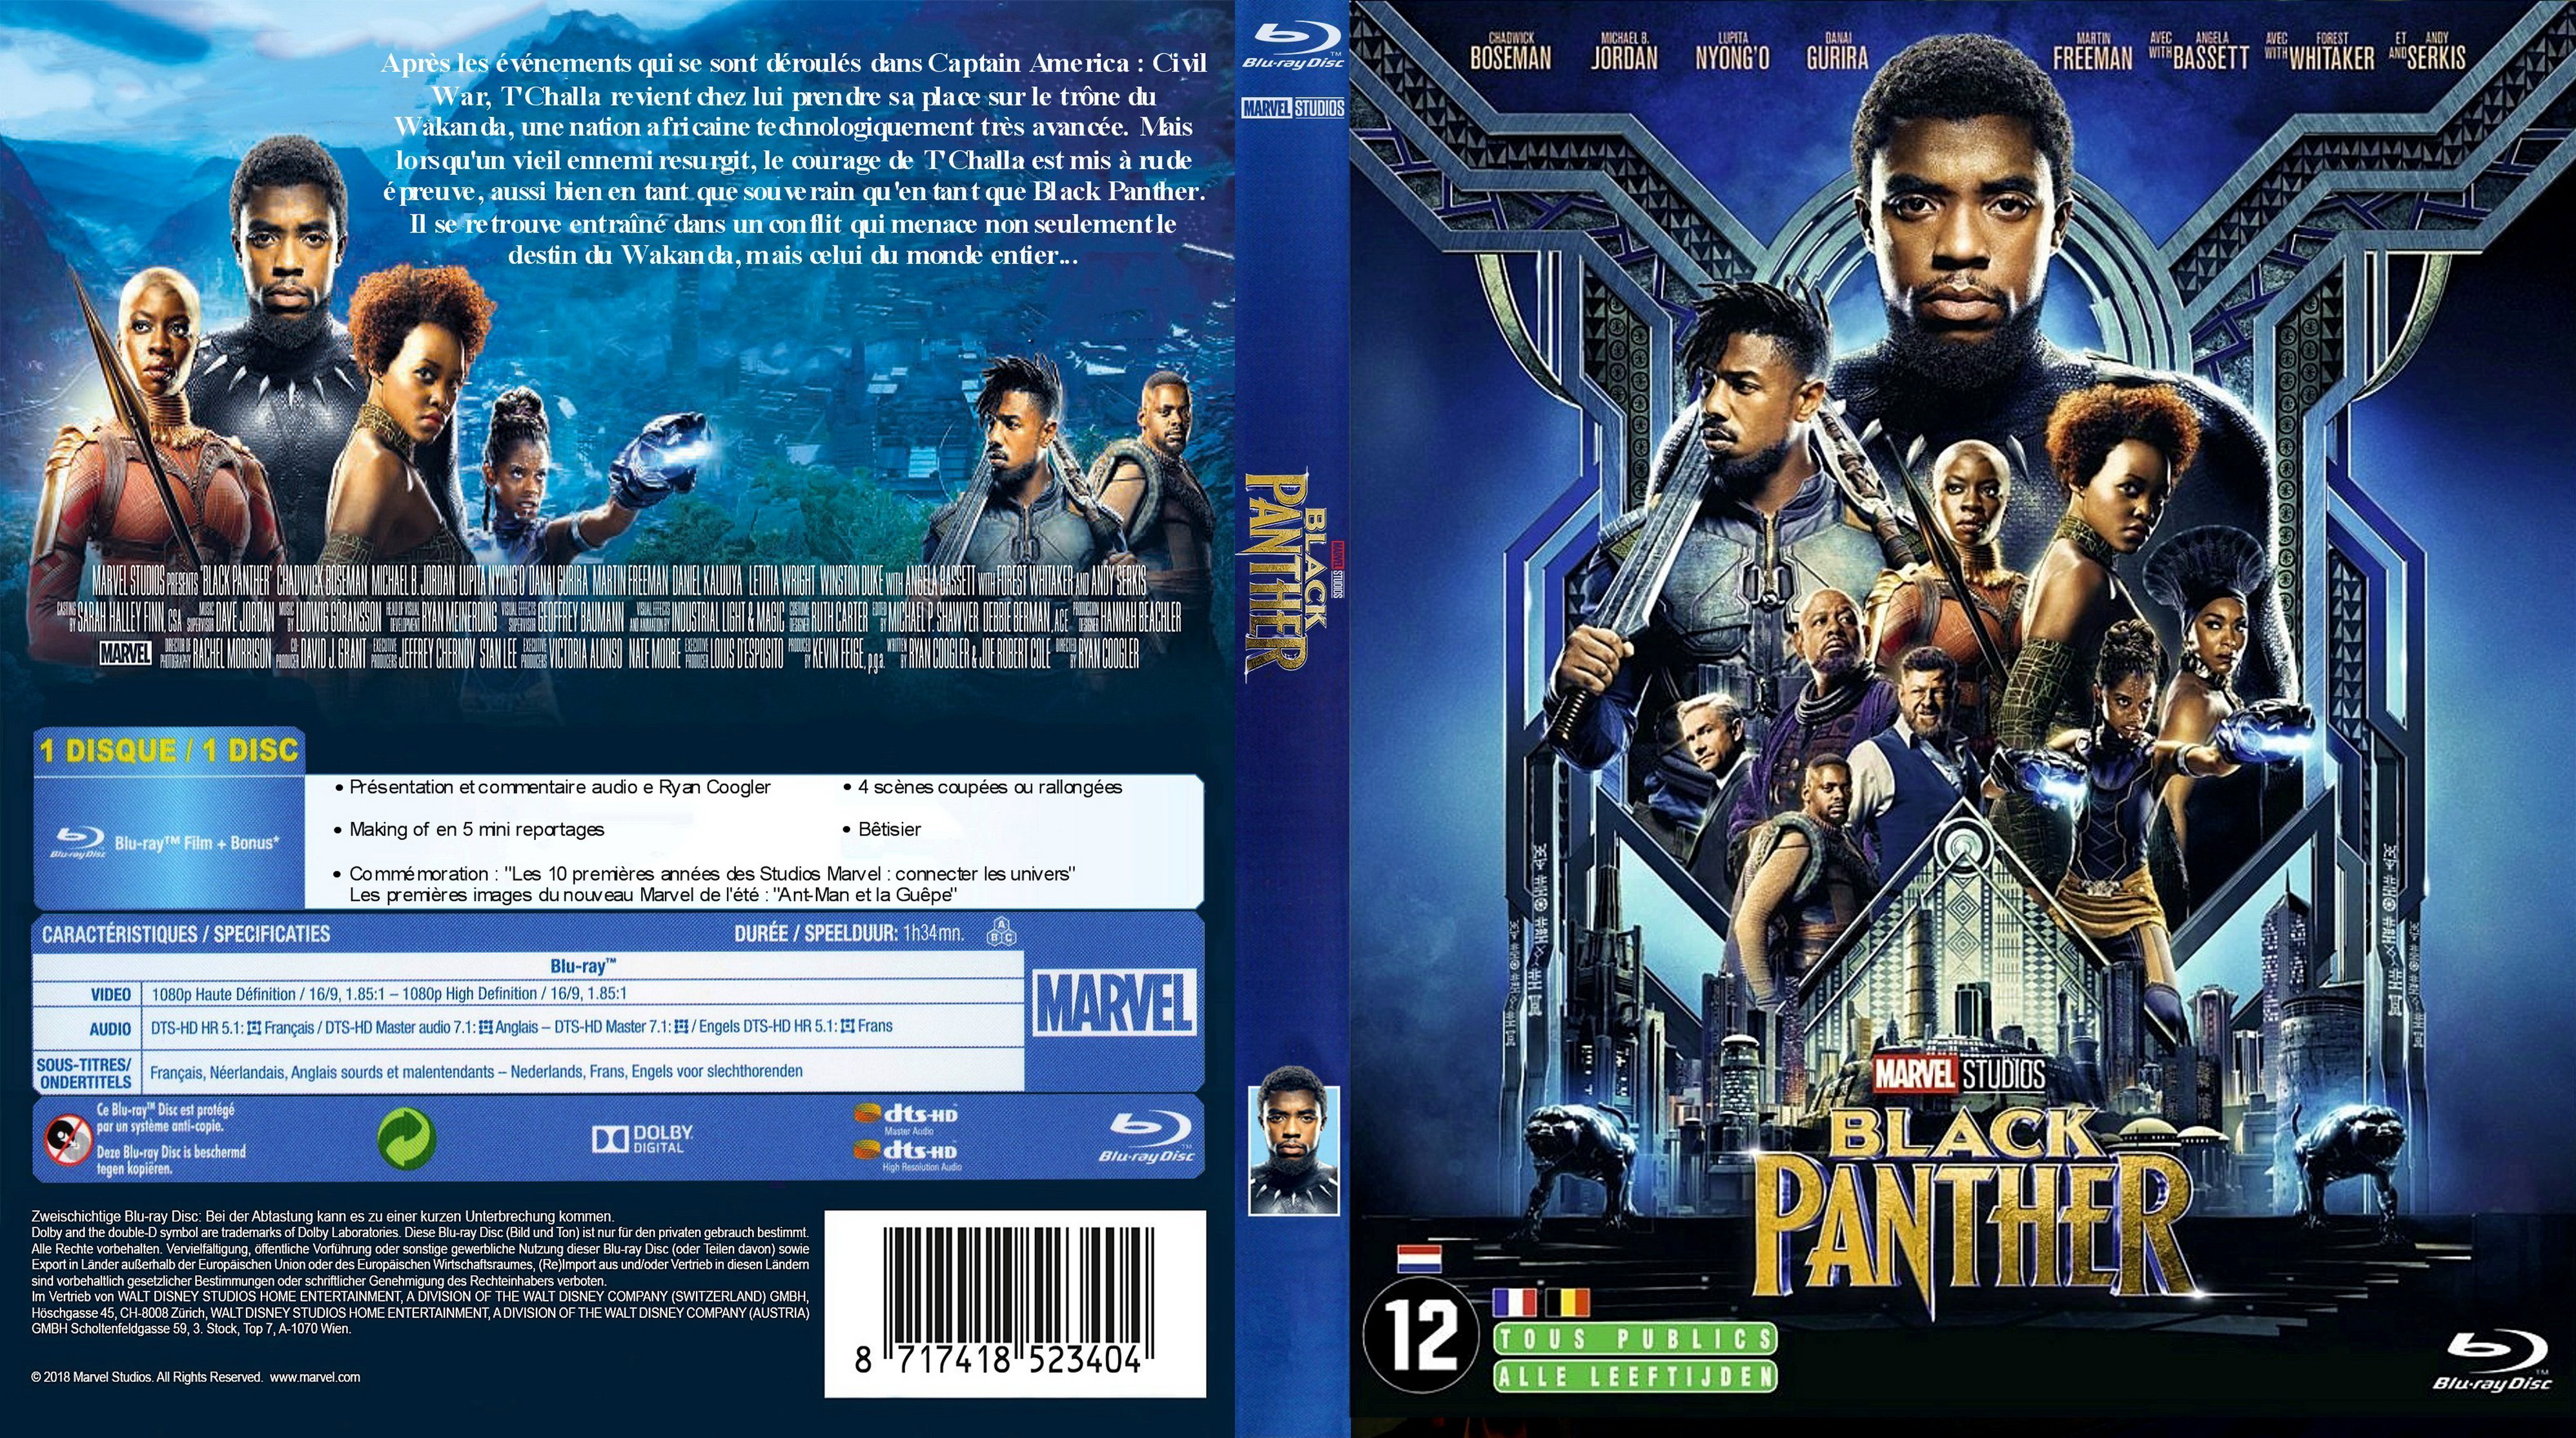 Jaquette DVD Black Panther custom (BLU-RAY)